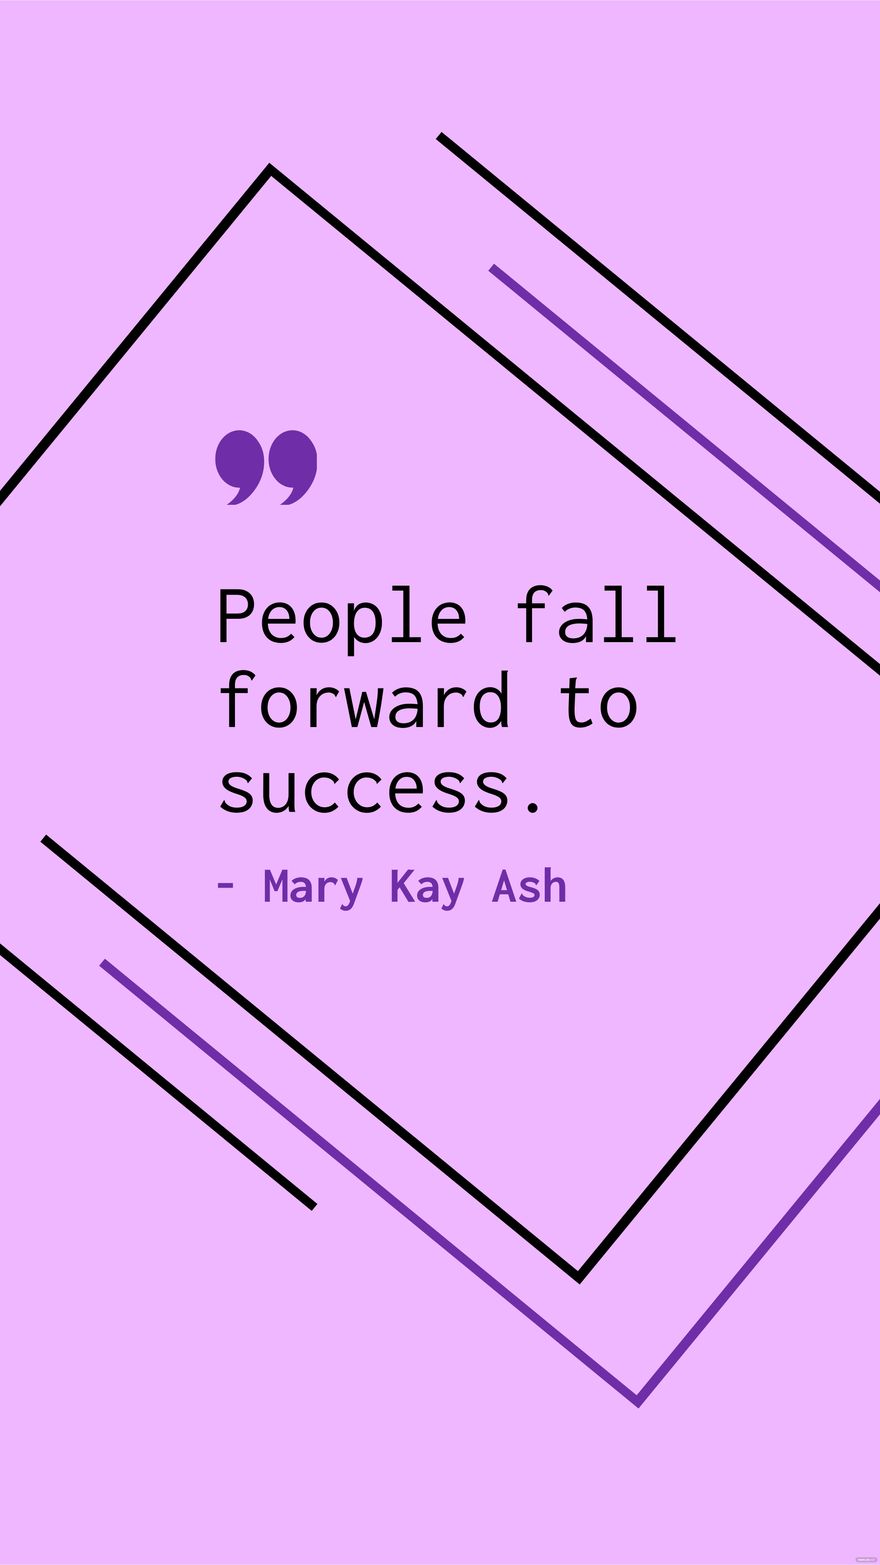 Free Mary Kay Ash - People fall forward to success. in JPG